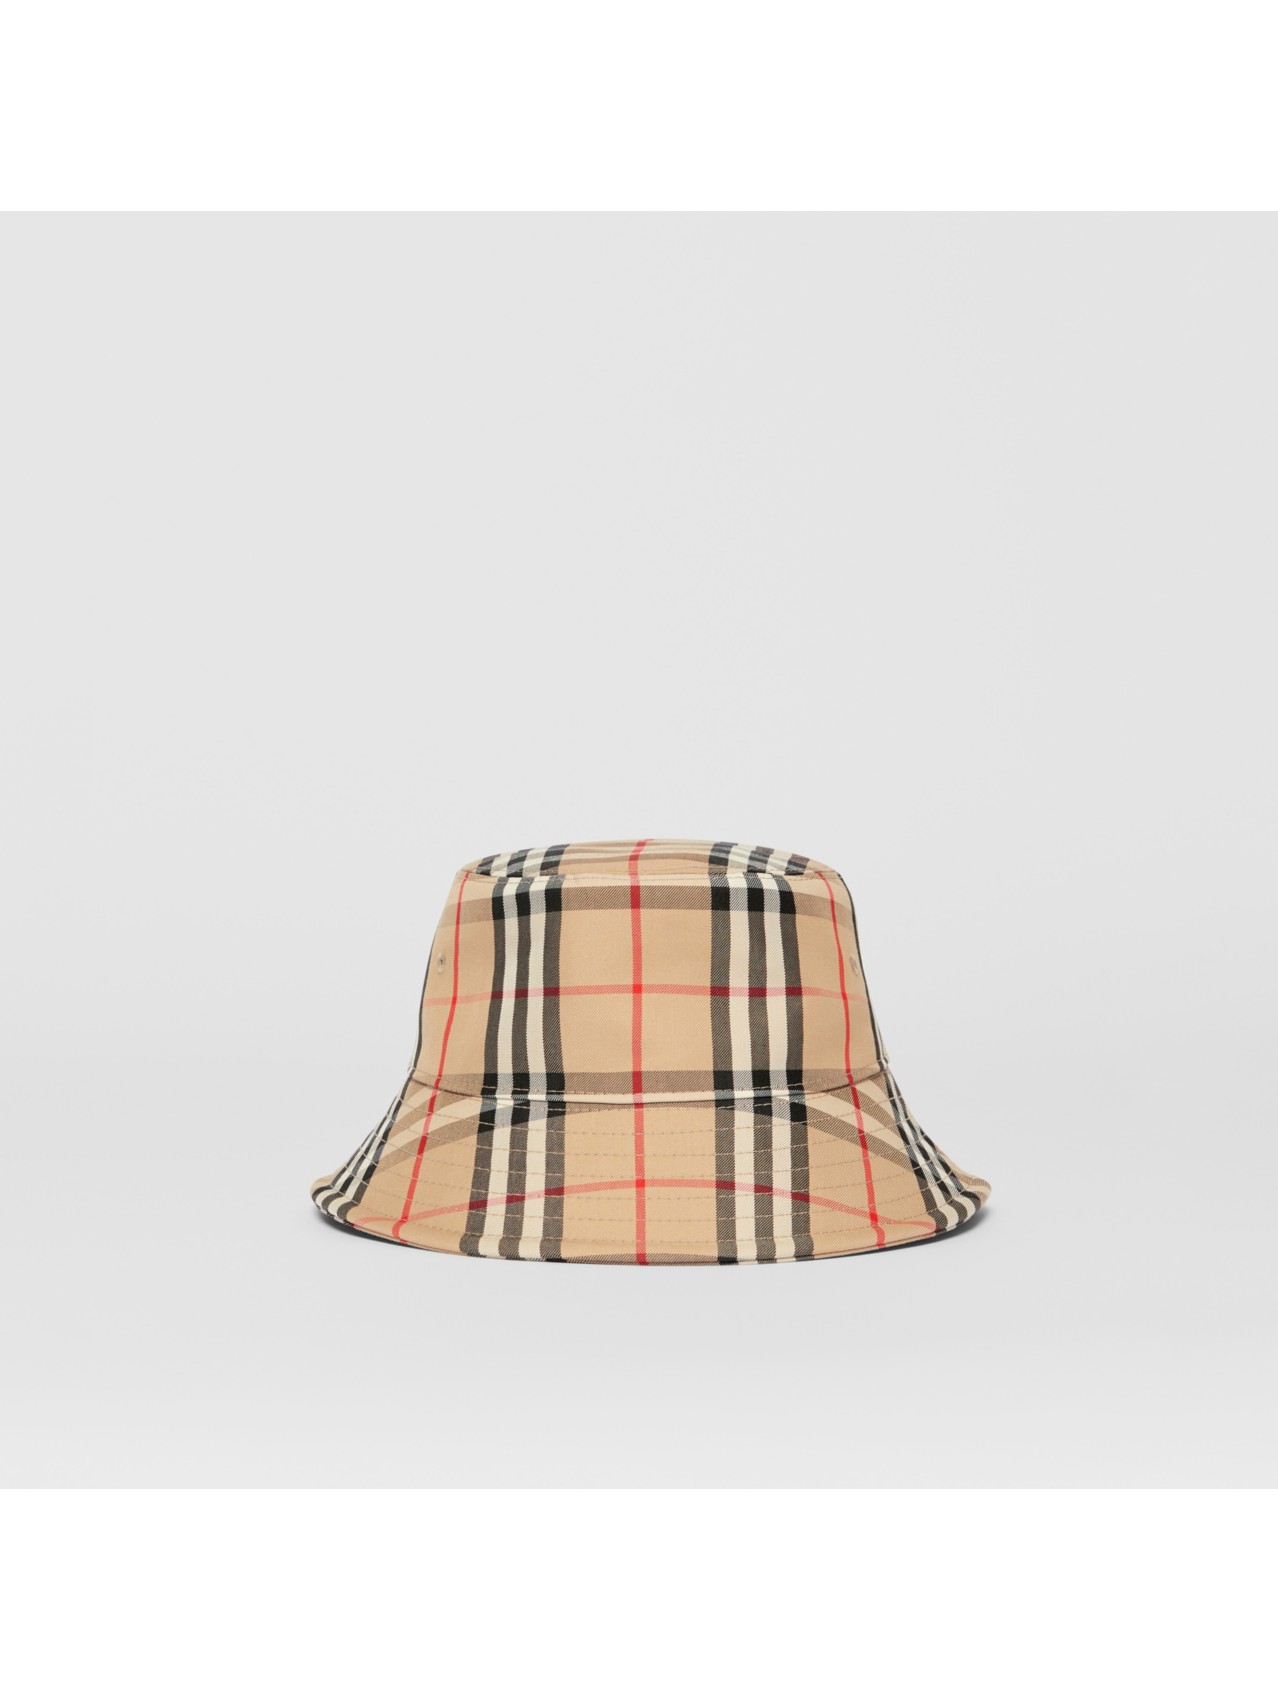 Vintage Check Technical Bucket Hat in Archive | Burberry States